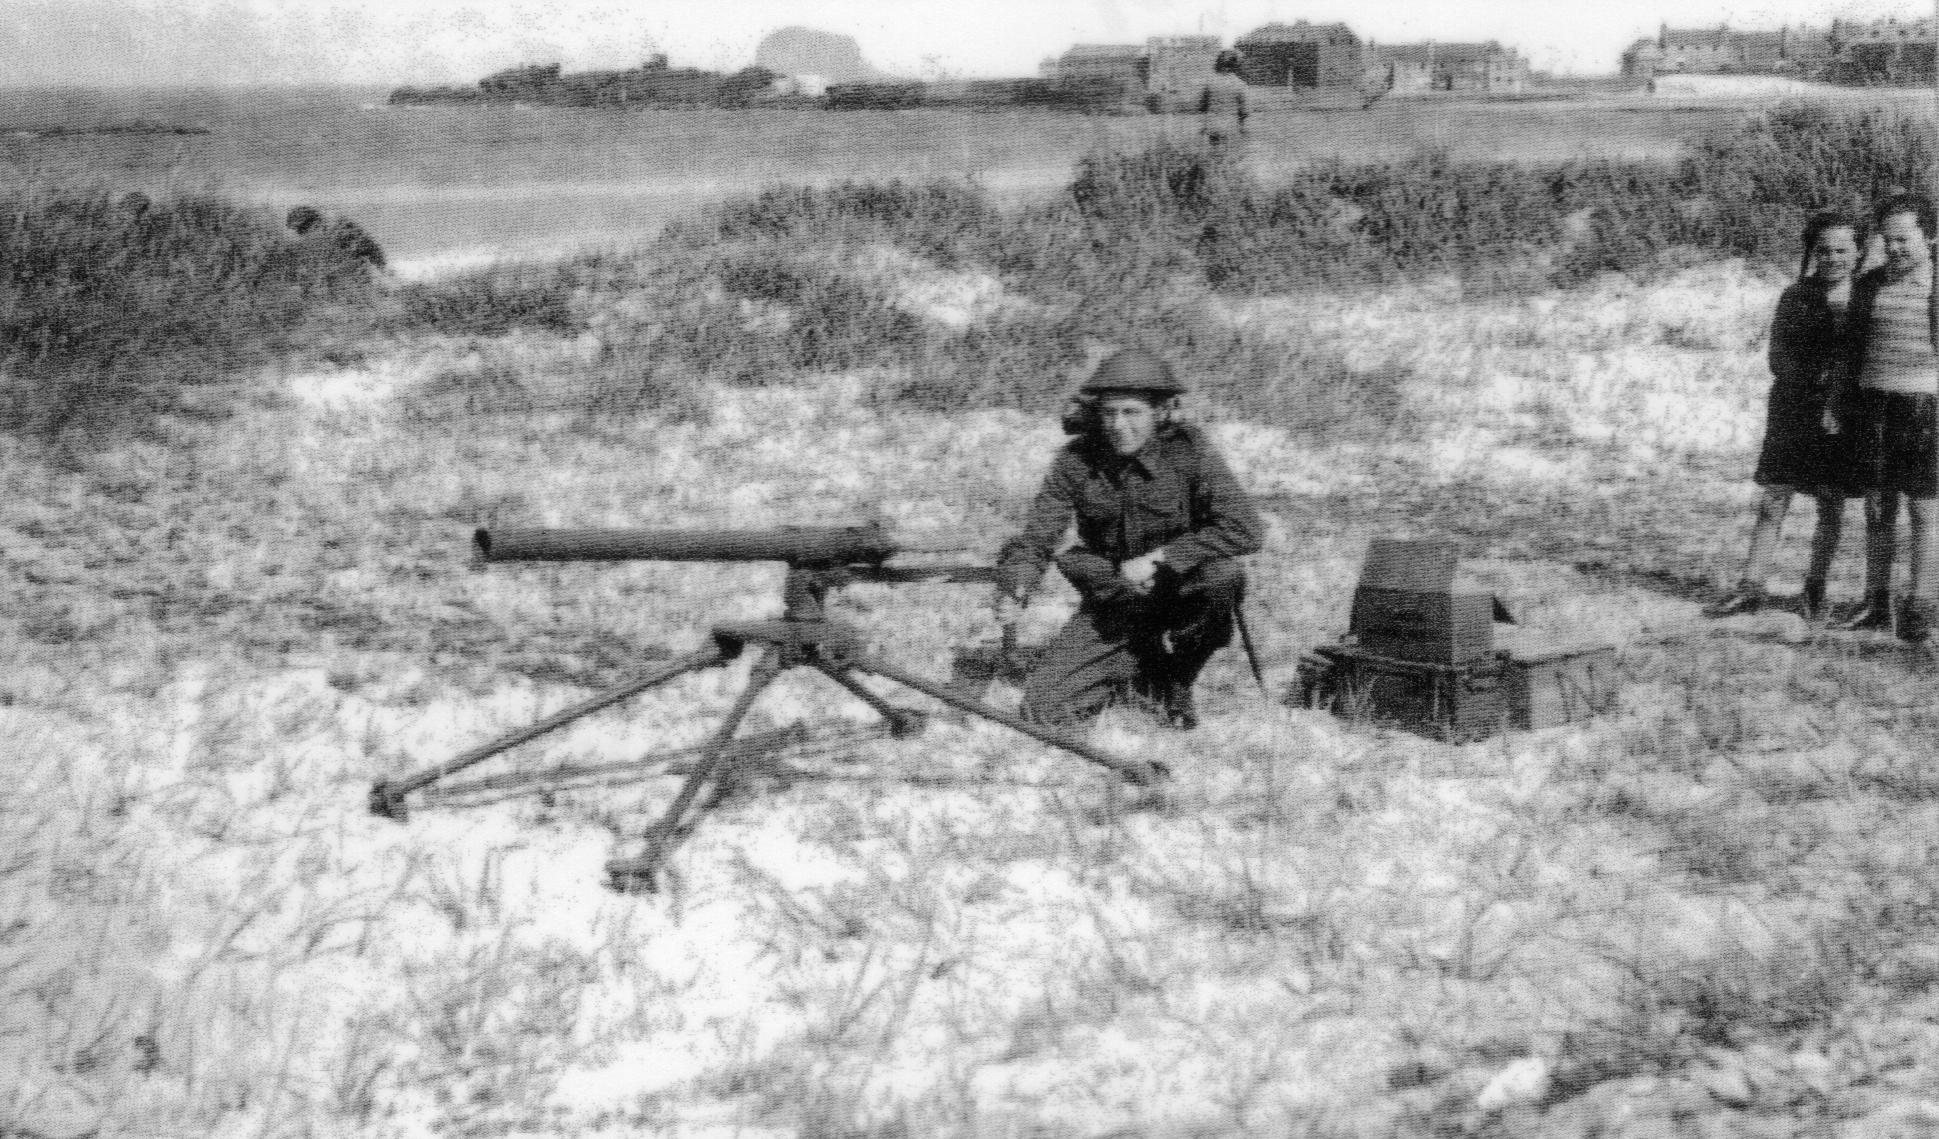 NB Home Guard with Stokes Mortar.jpg